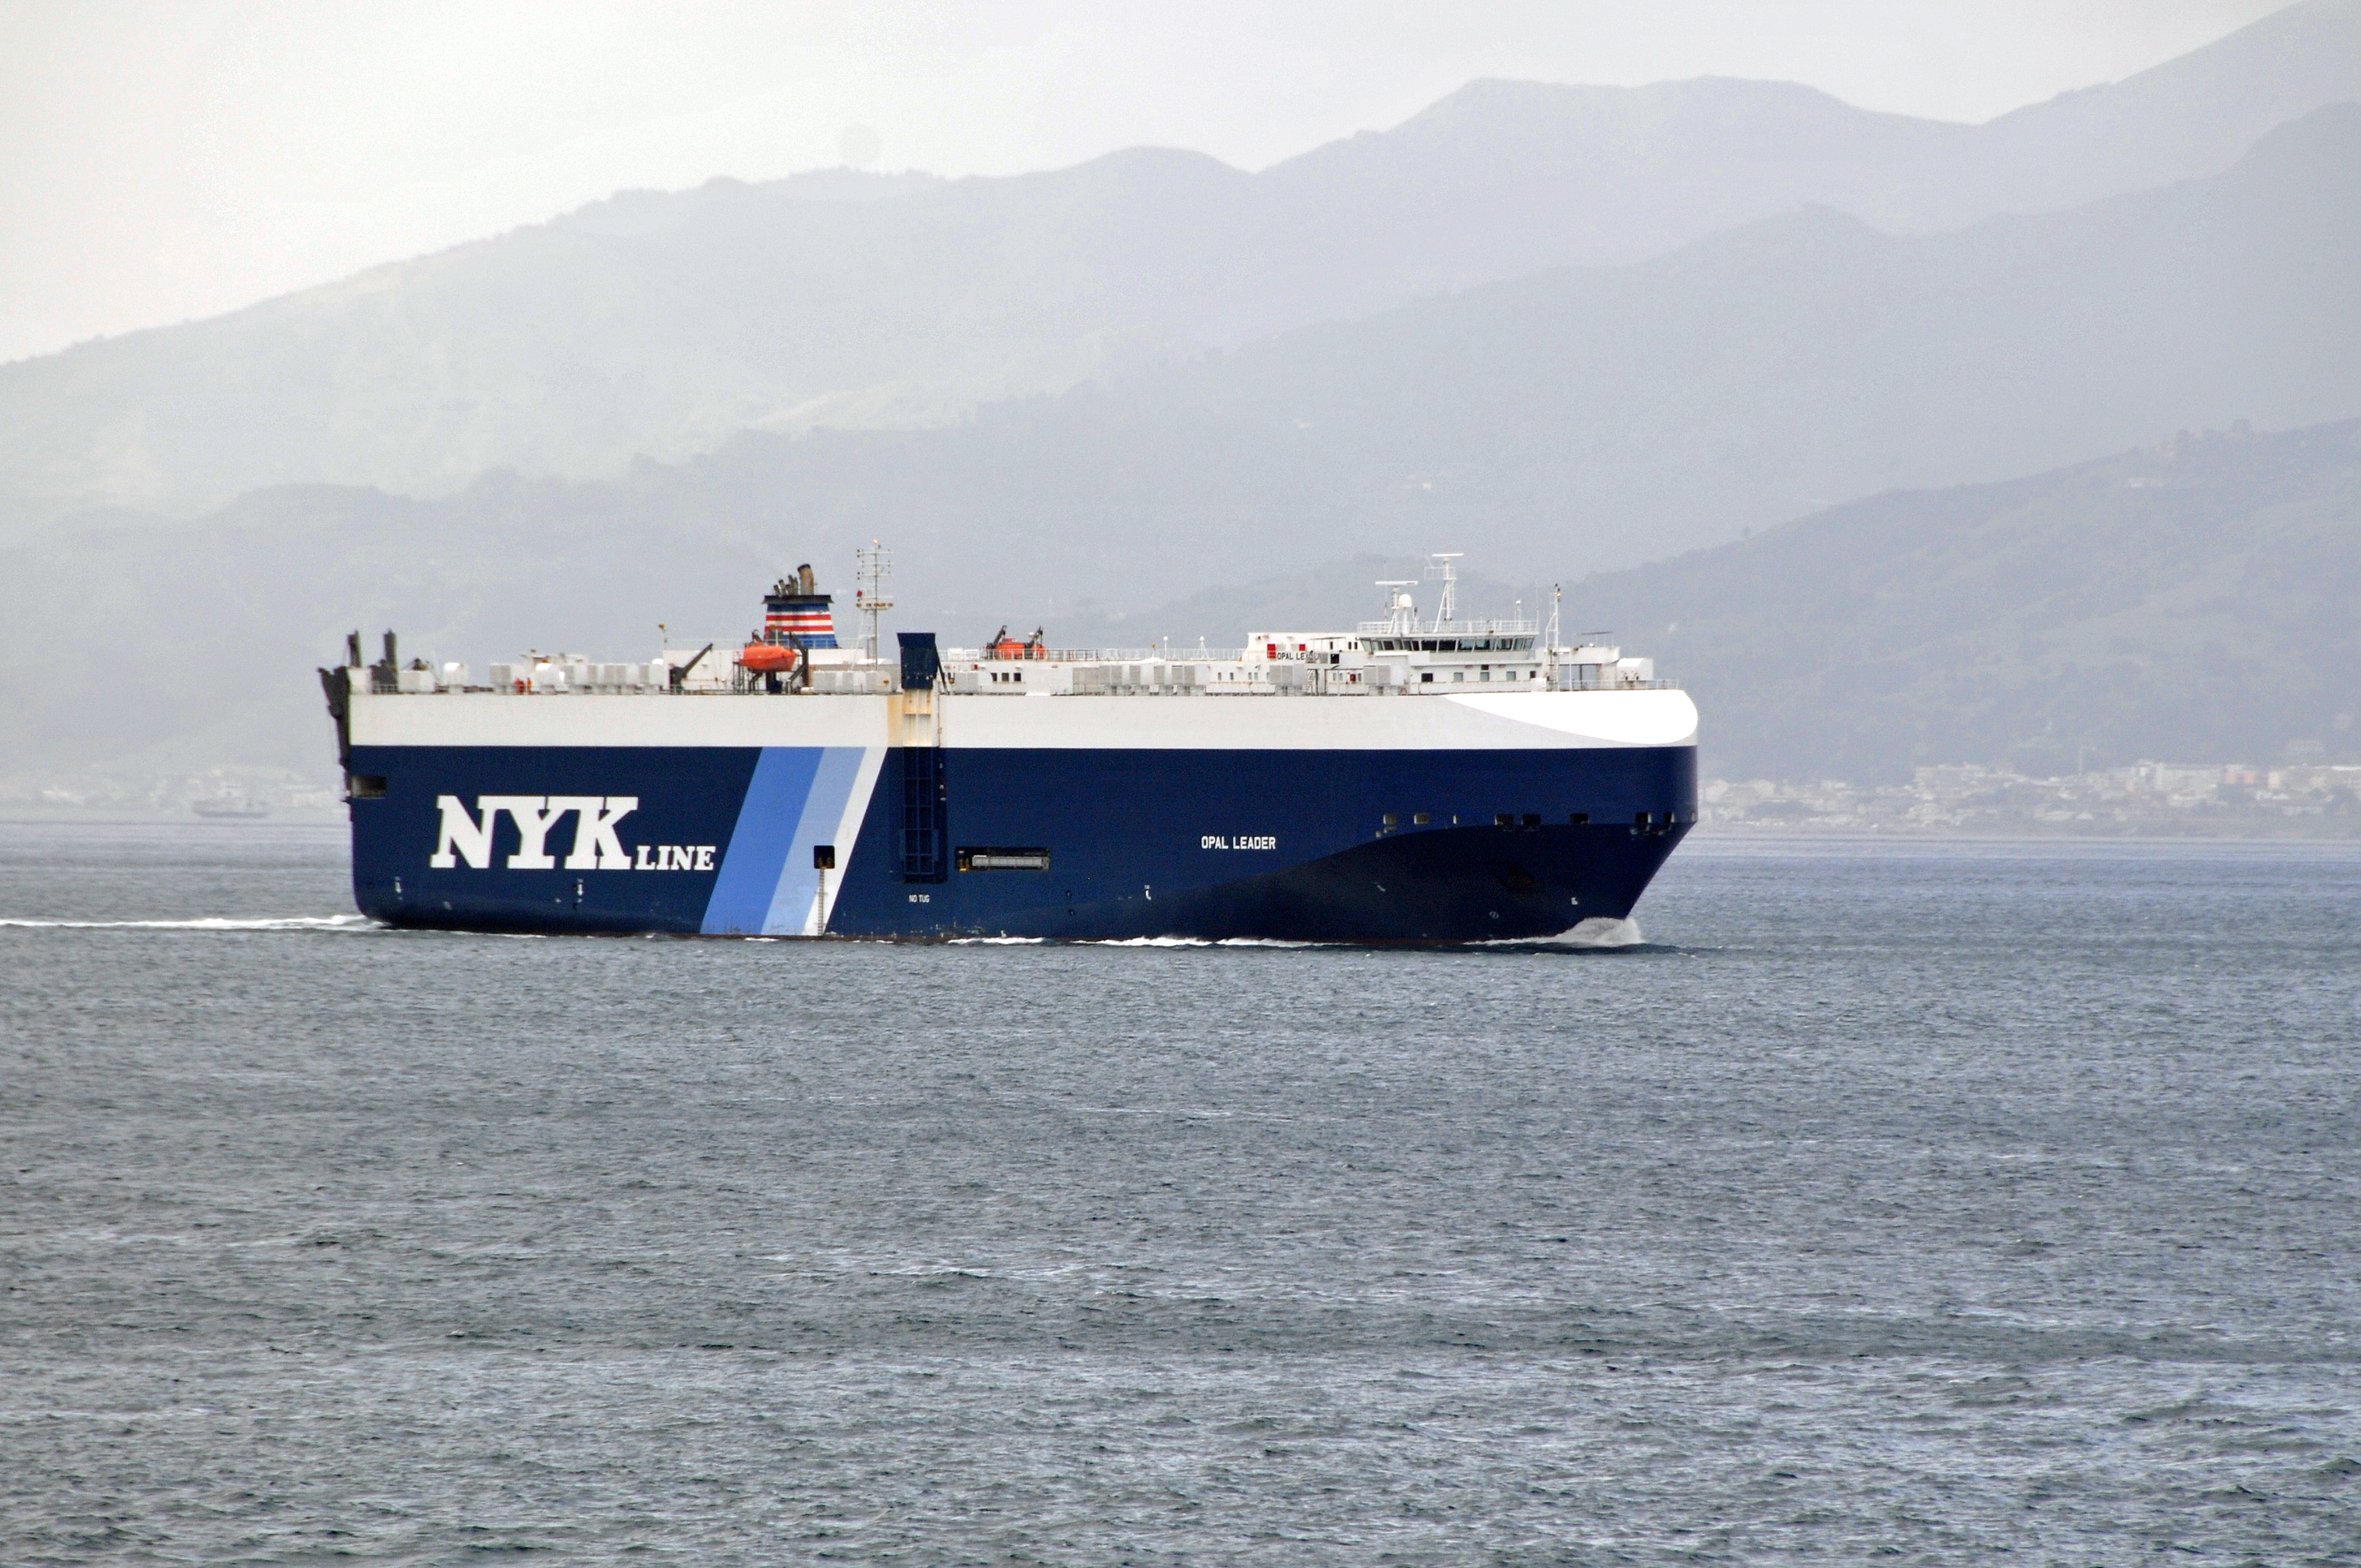 Car carrier Opal Leader transiting the Strait of Messina - 20 Oct. 2010